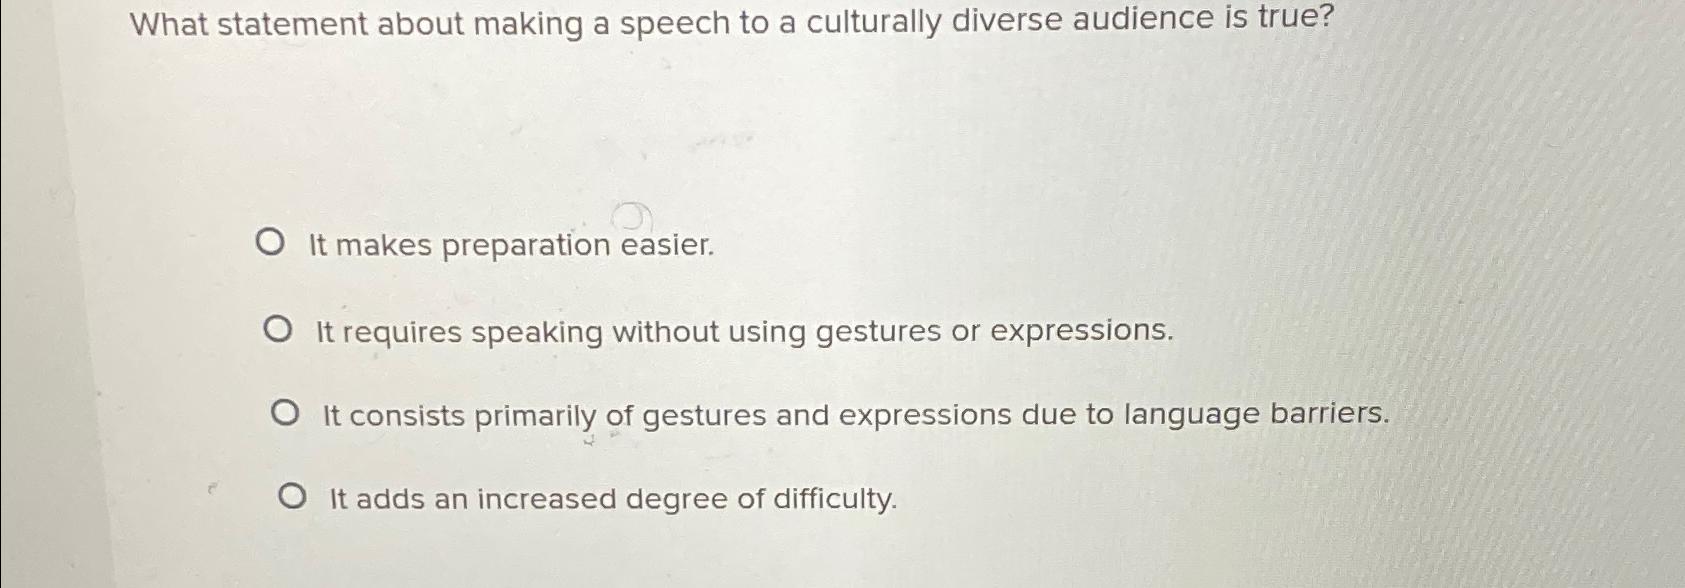 making a speech to a culturally diverse audience quizlet